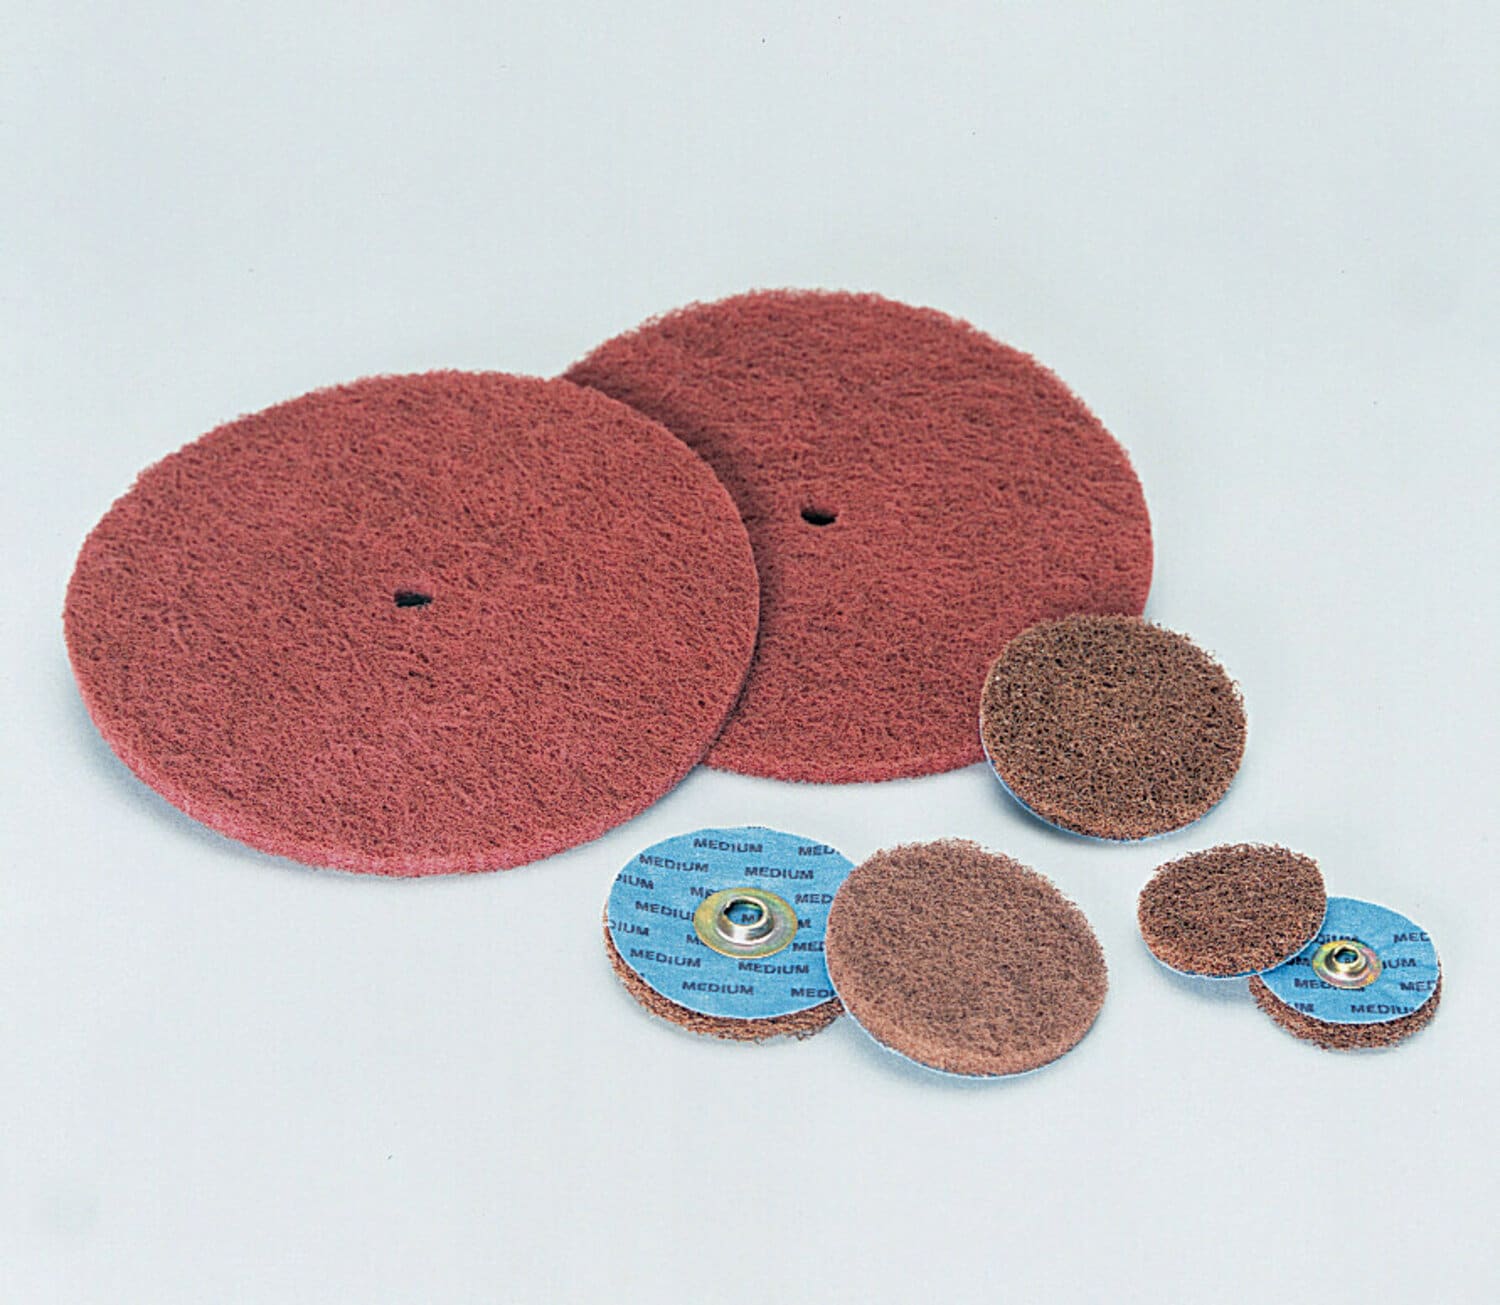 7010310120 - Standard Abrasives Buff and Blend GP Disc, 840110, 10 in x 1/2 in A
MED, 10/Pac, 100 ea/Case